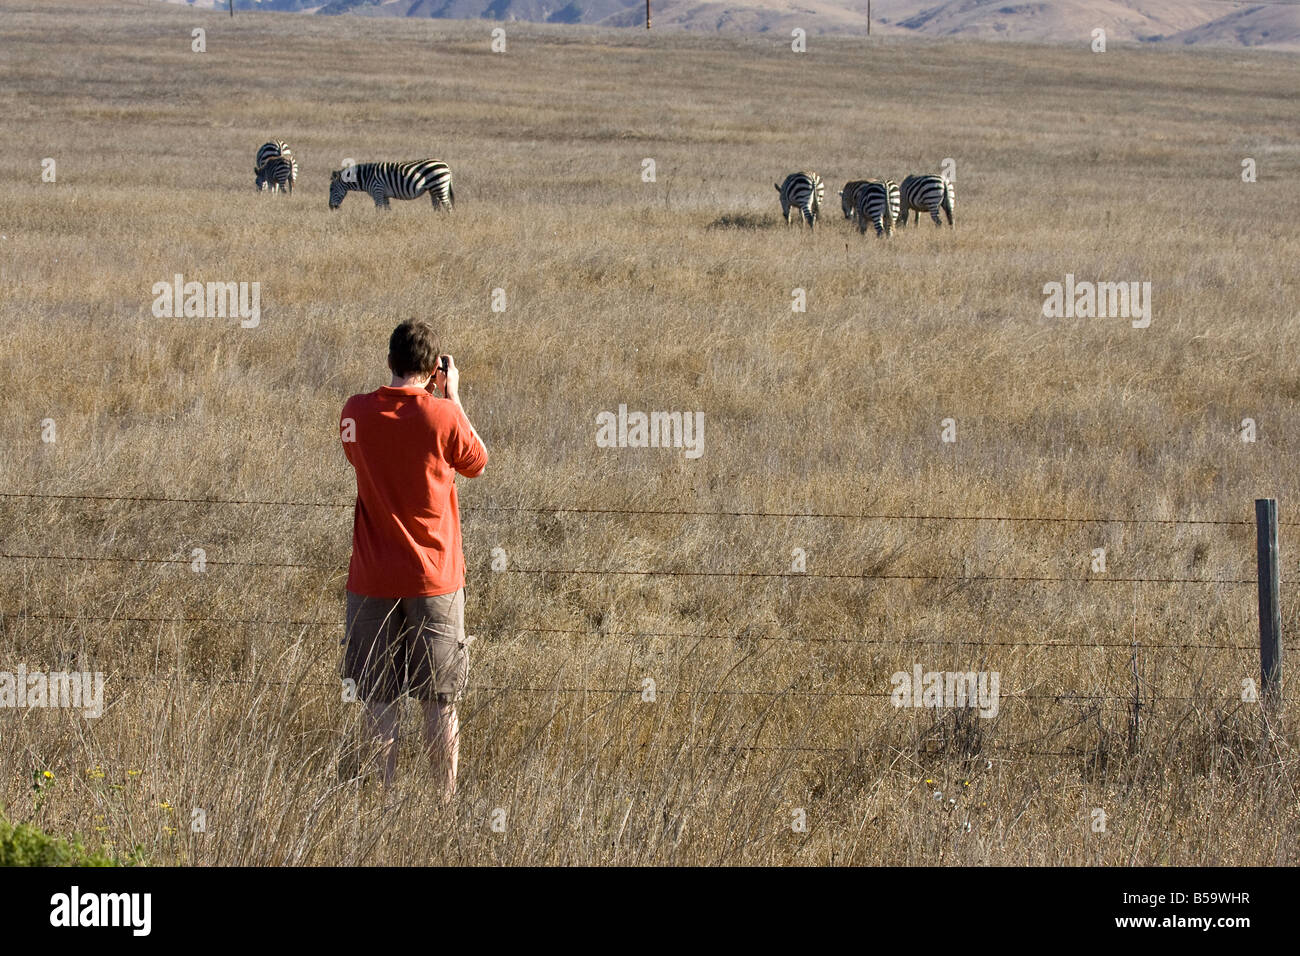 Man in Red Shirt Photographing Zebras on Hearst Castle Property Stock Photo